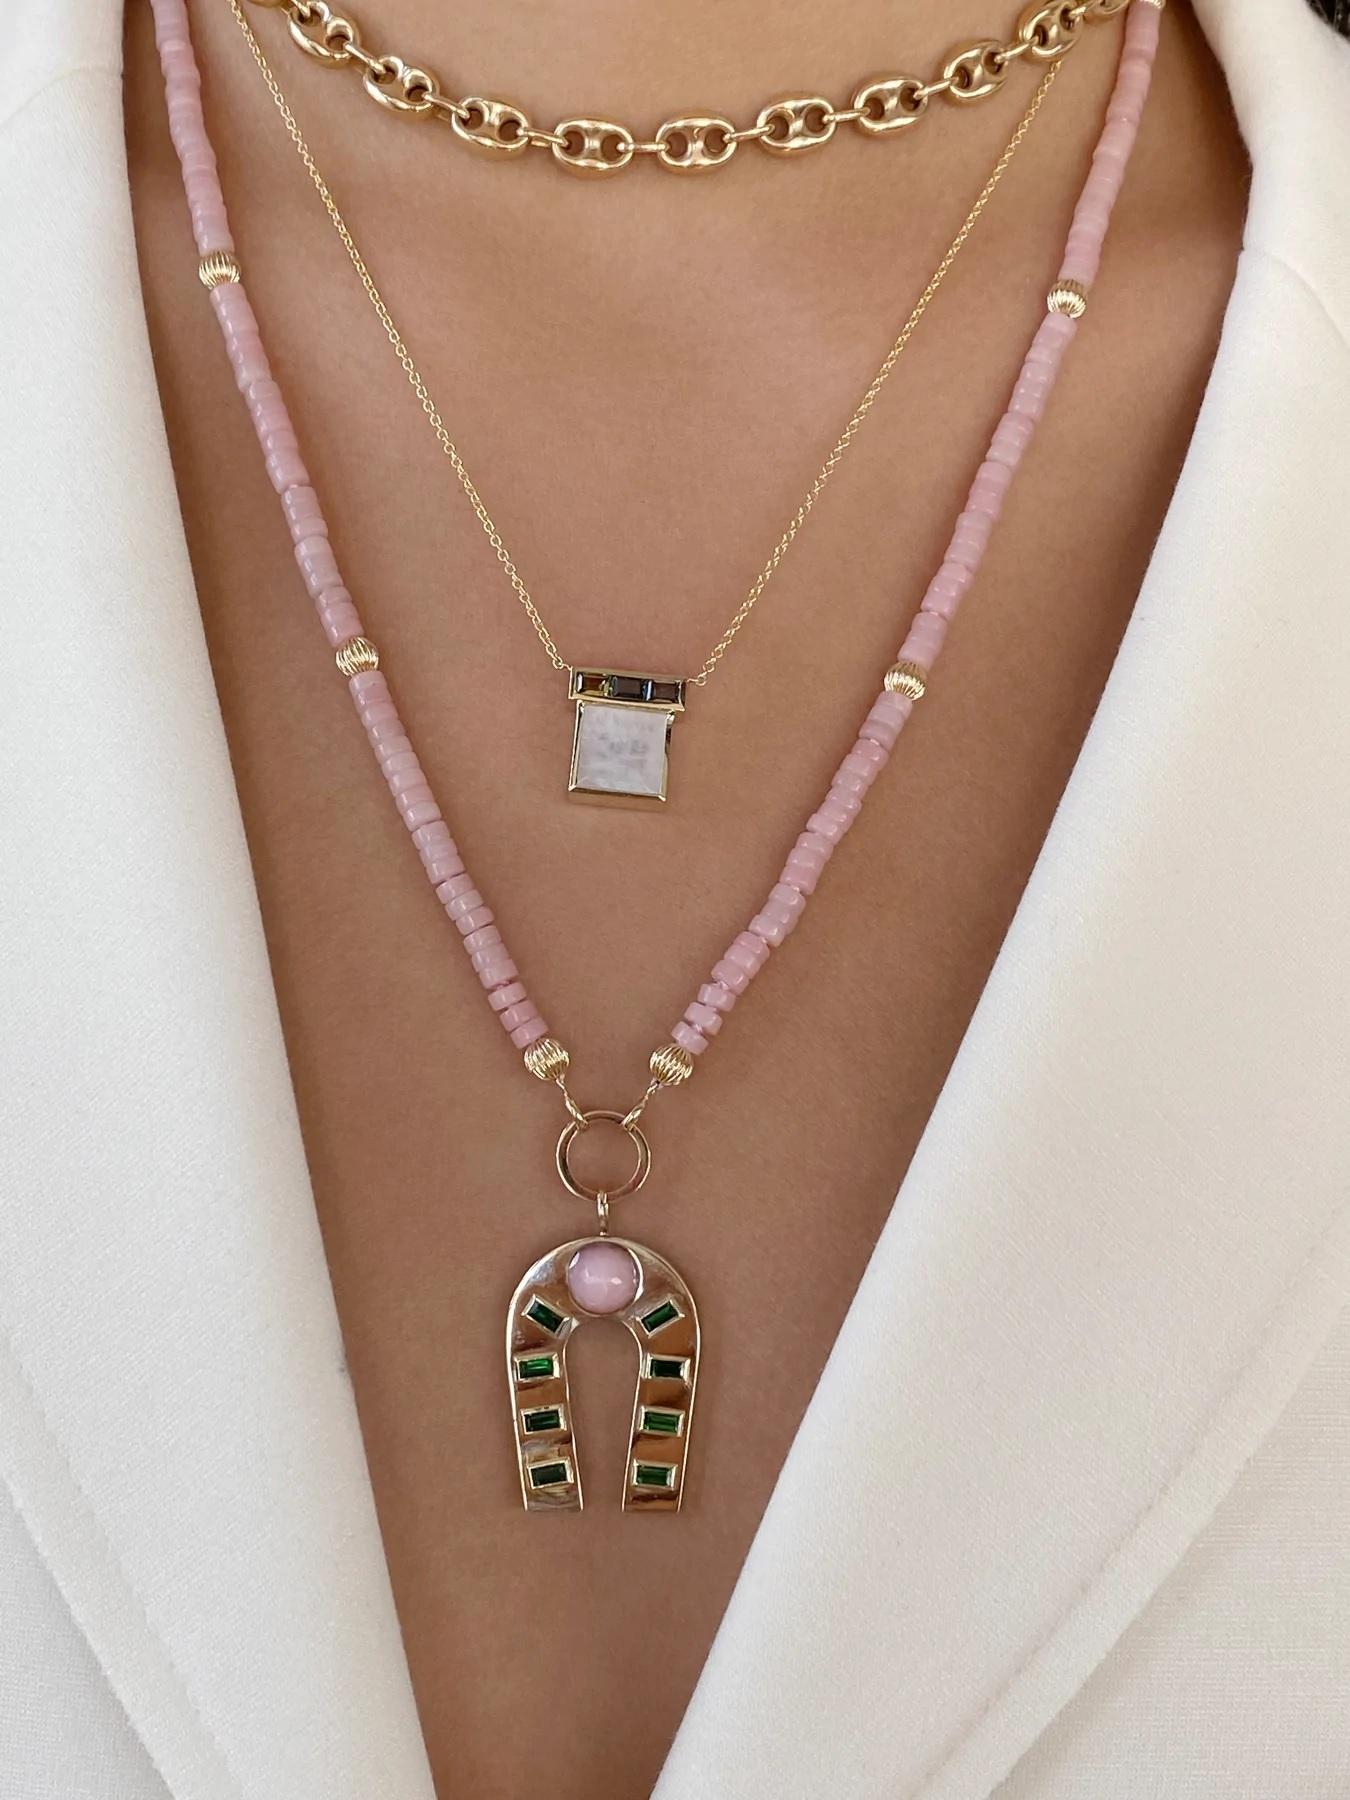 A fresh and gorgeous way to wear your meaningful Talisman charms. We celebrate, as we manifest, trusting that the outcome is on it's way. The Celebration necklace has over 1 ct of Pink Opal, the stone of emotional balance, attracting love, peace and